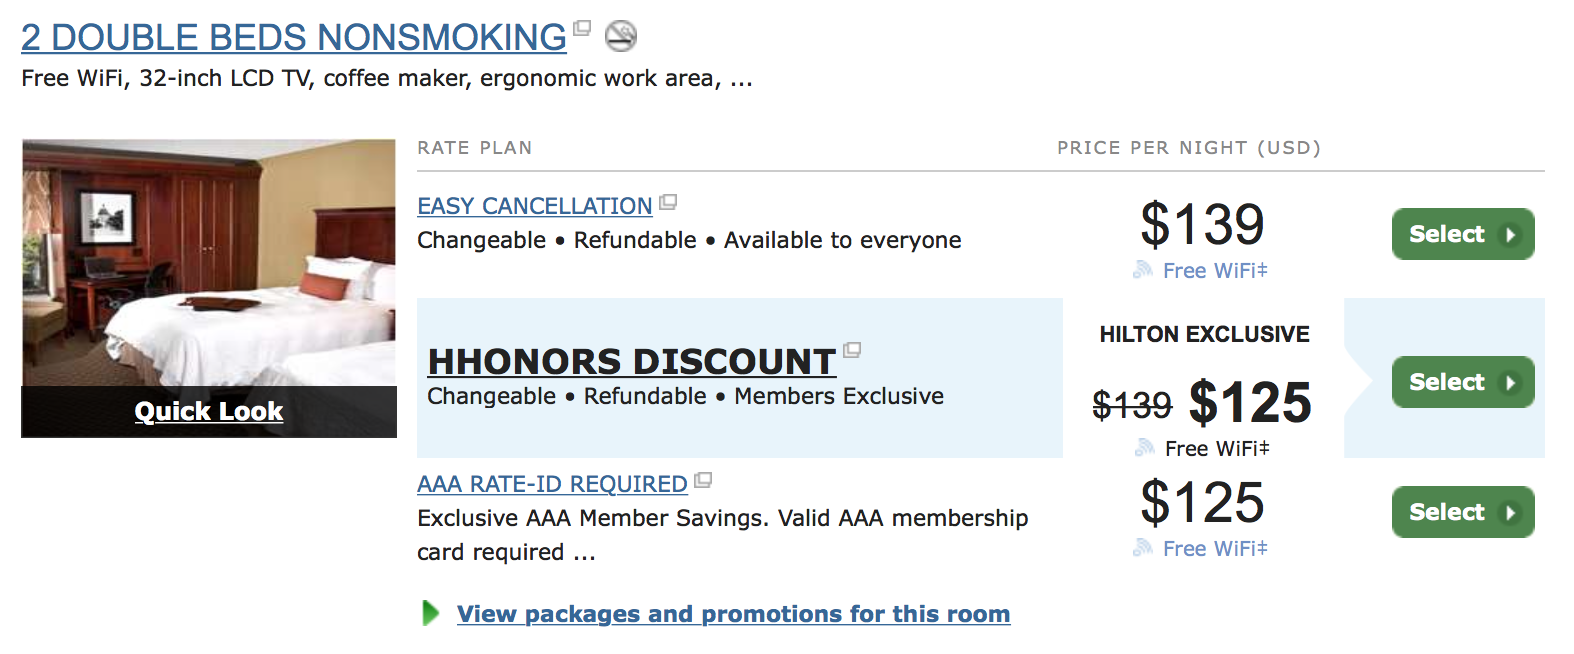 Screen shot of reservation compared to Stop Clicking Around discount.